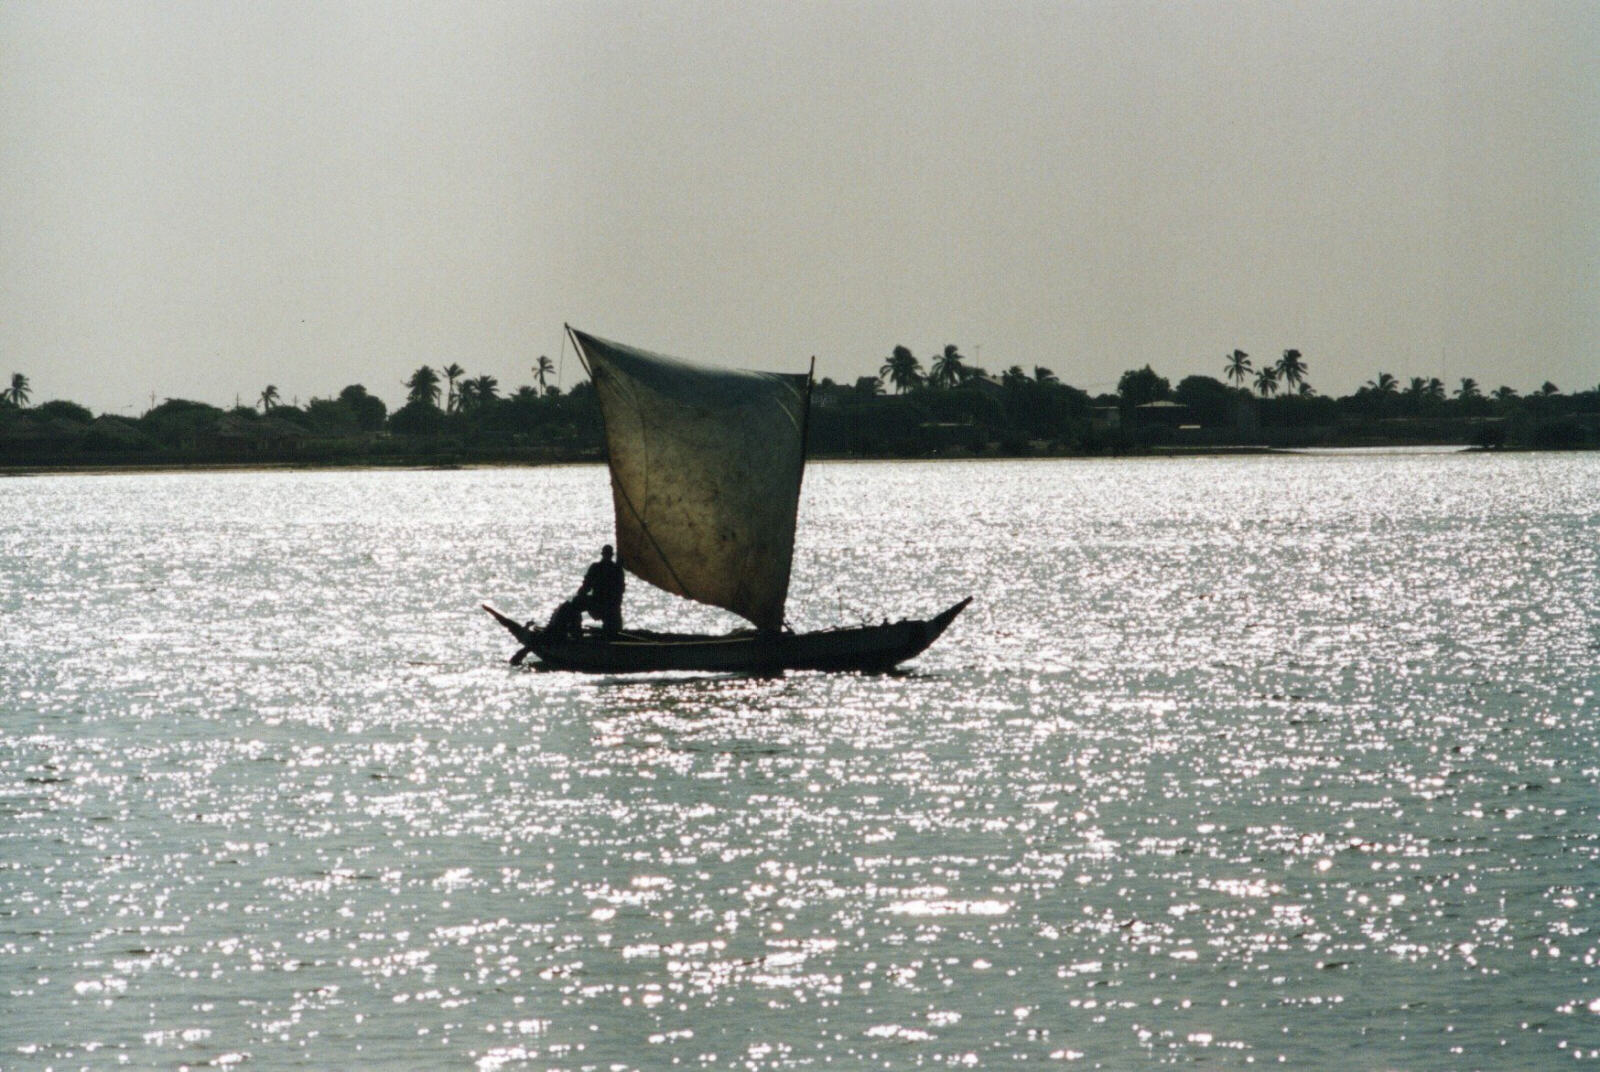 A sailboat on the Senegal river, from the museum in St Louis